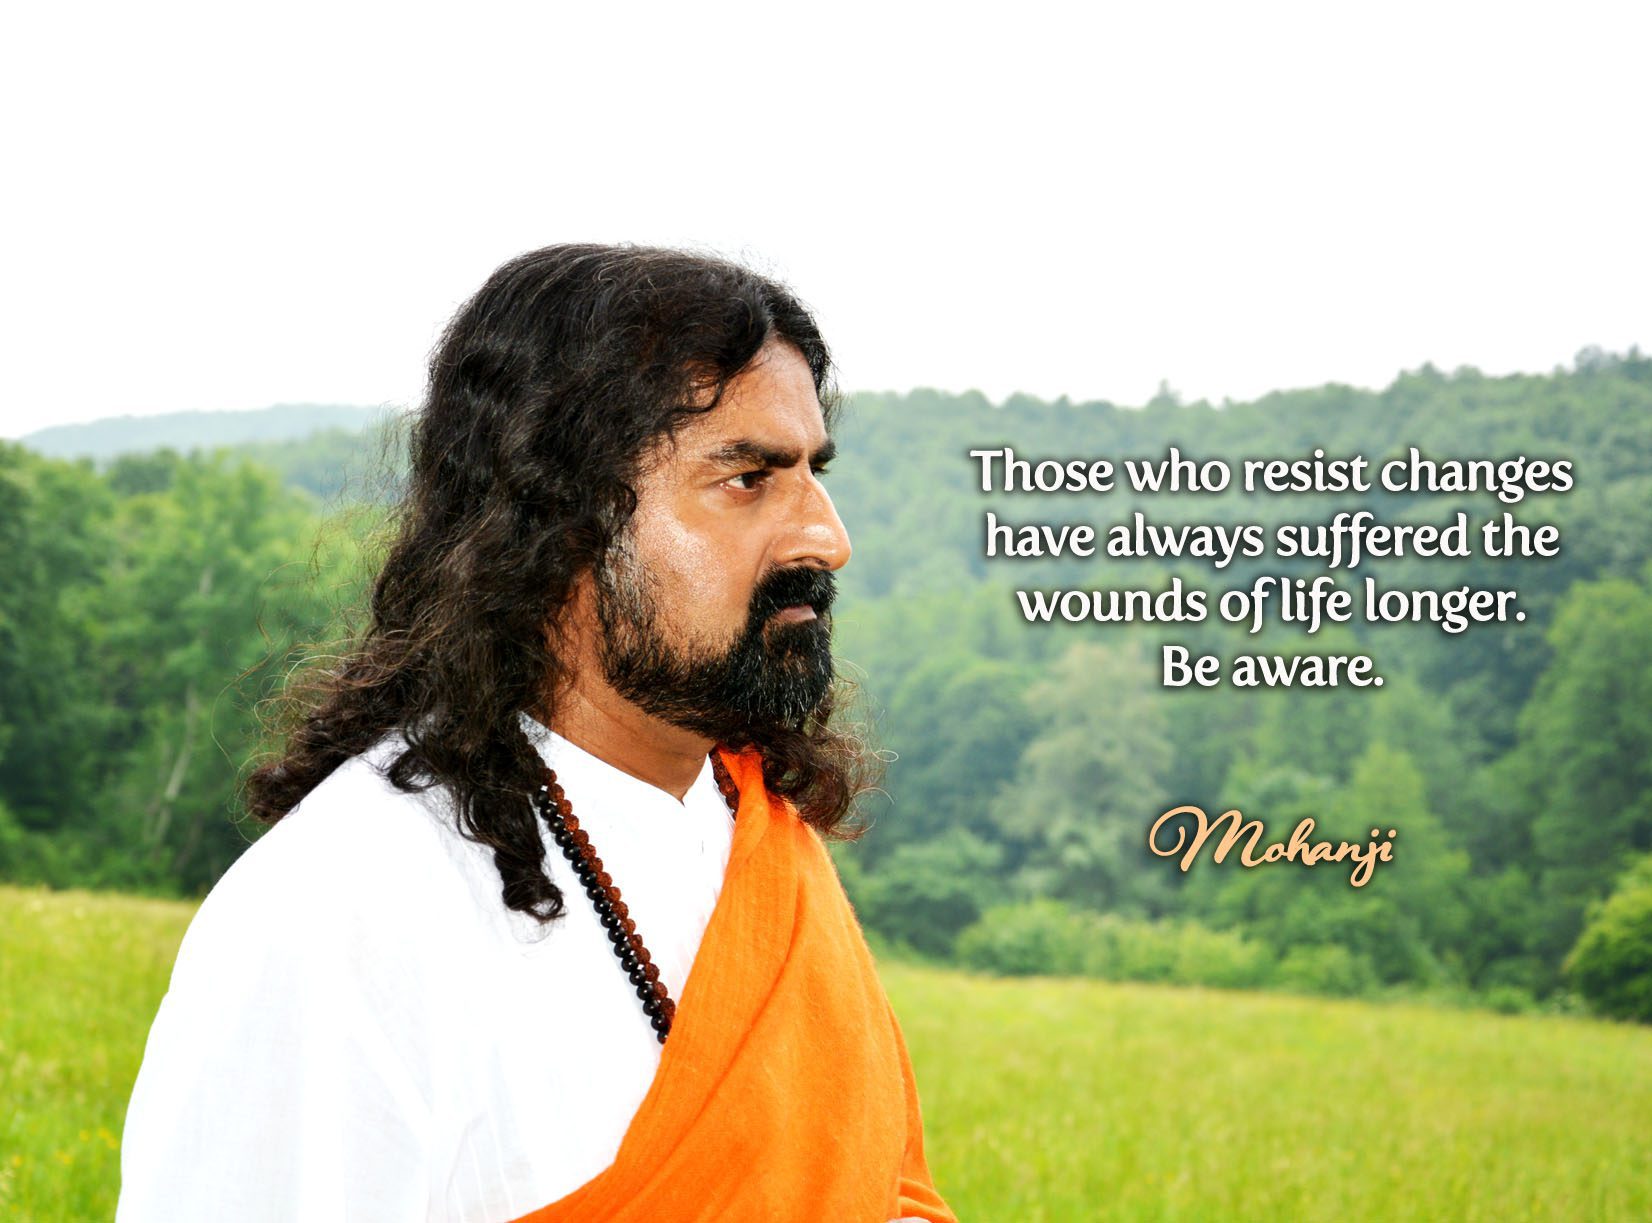 Mohanji quote - Those who resist changes